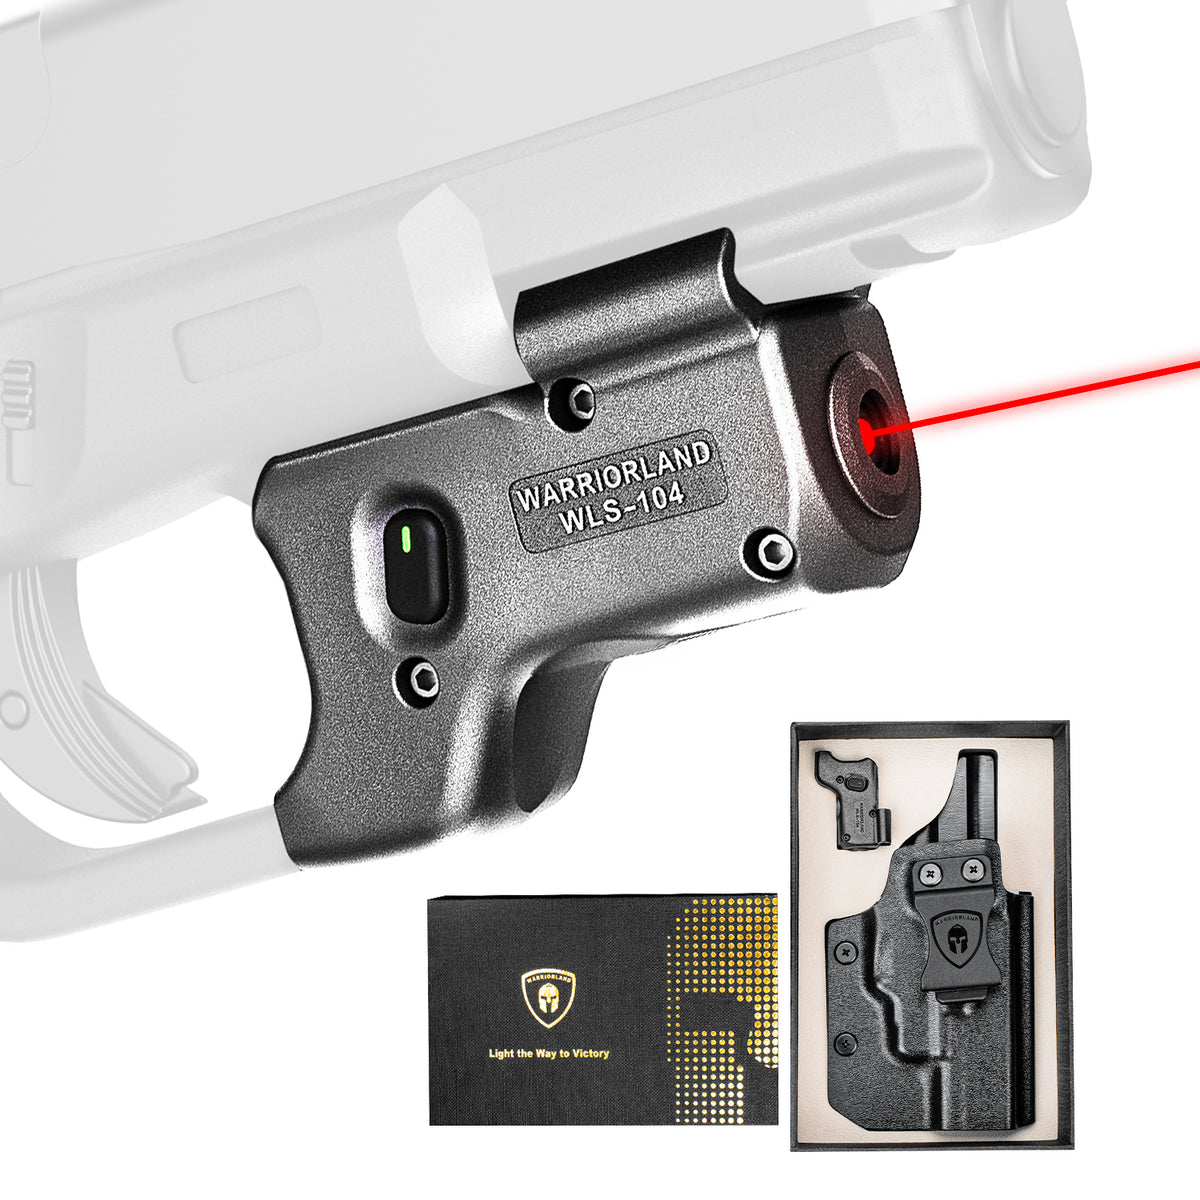 WARRIORLAND Green Laser Sight With Holster Combo Tailored Fit Taurus G2C / Taurus G3C / Millennium G2 PT111 & PT140, Ultra Compact G2C Beam Sight, Gun Sight with Ambidextrous On/Off Switch & Power Indicator, WLS-101G-H